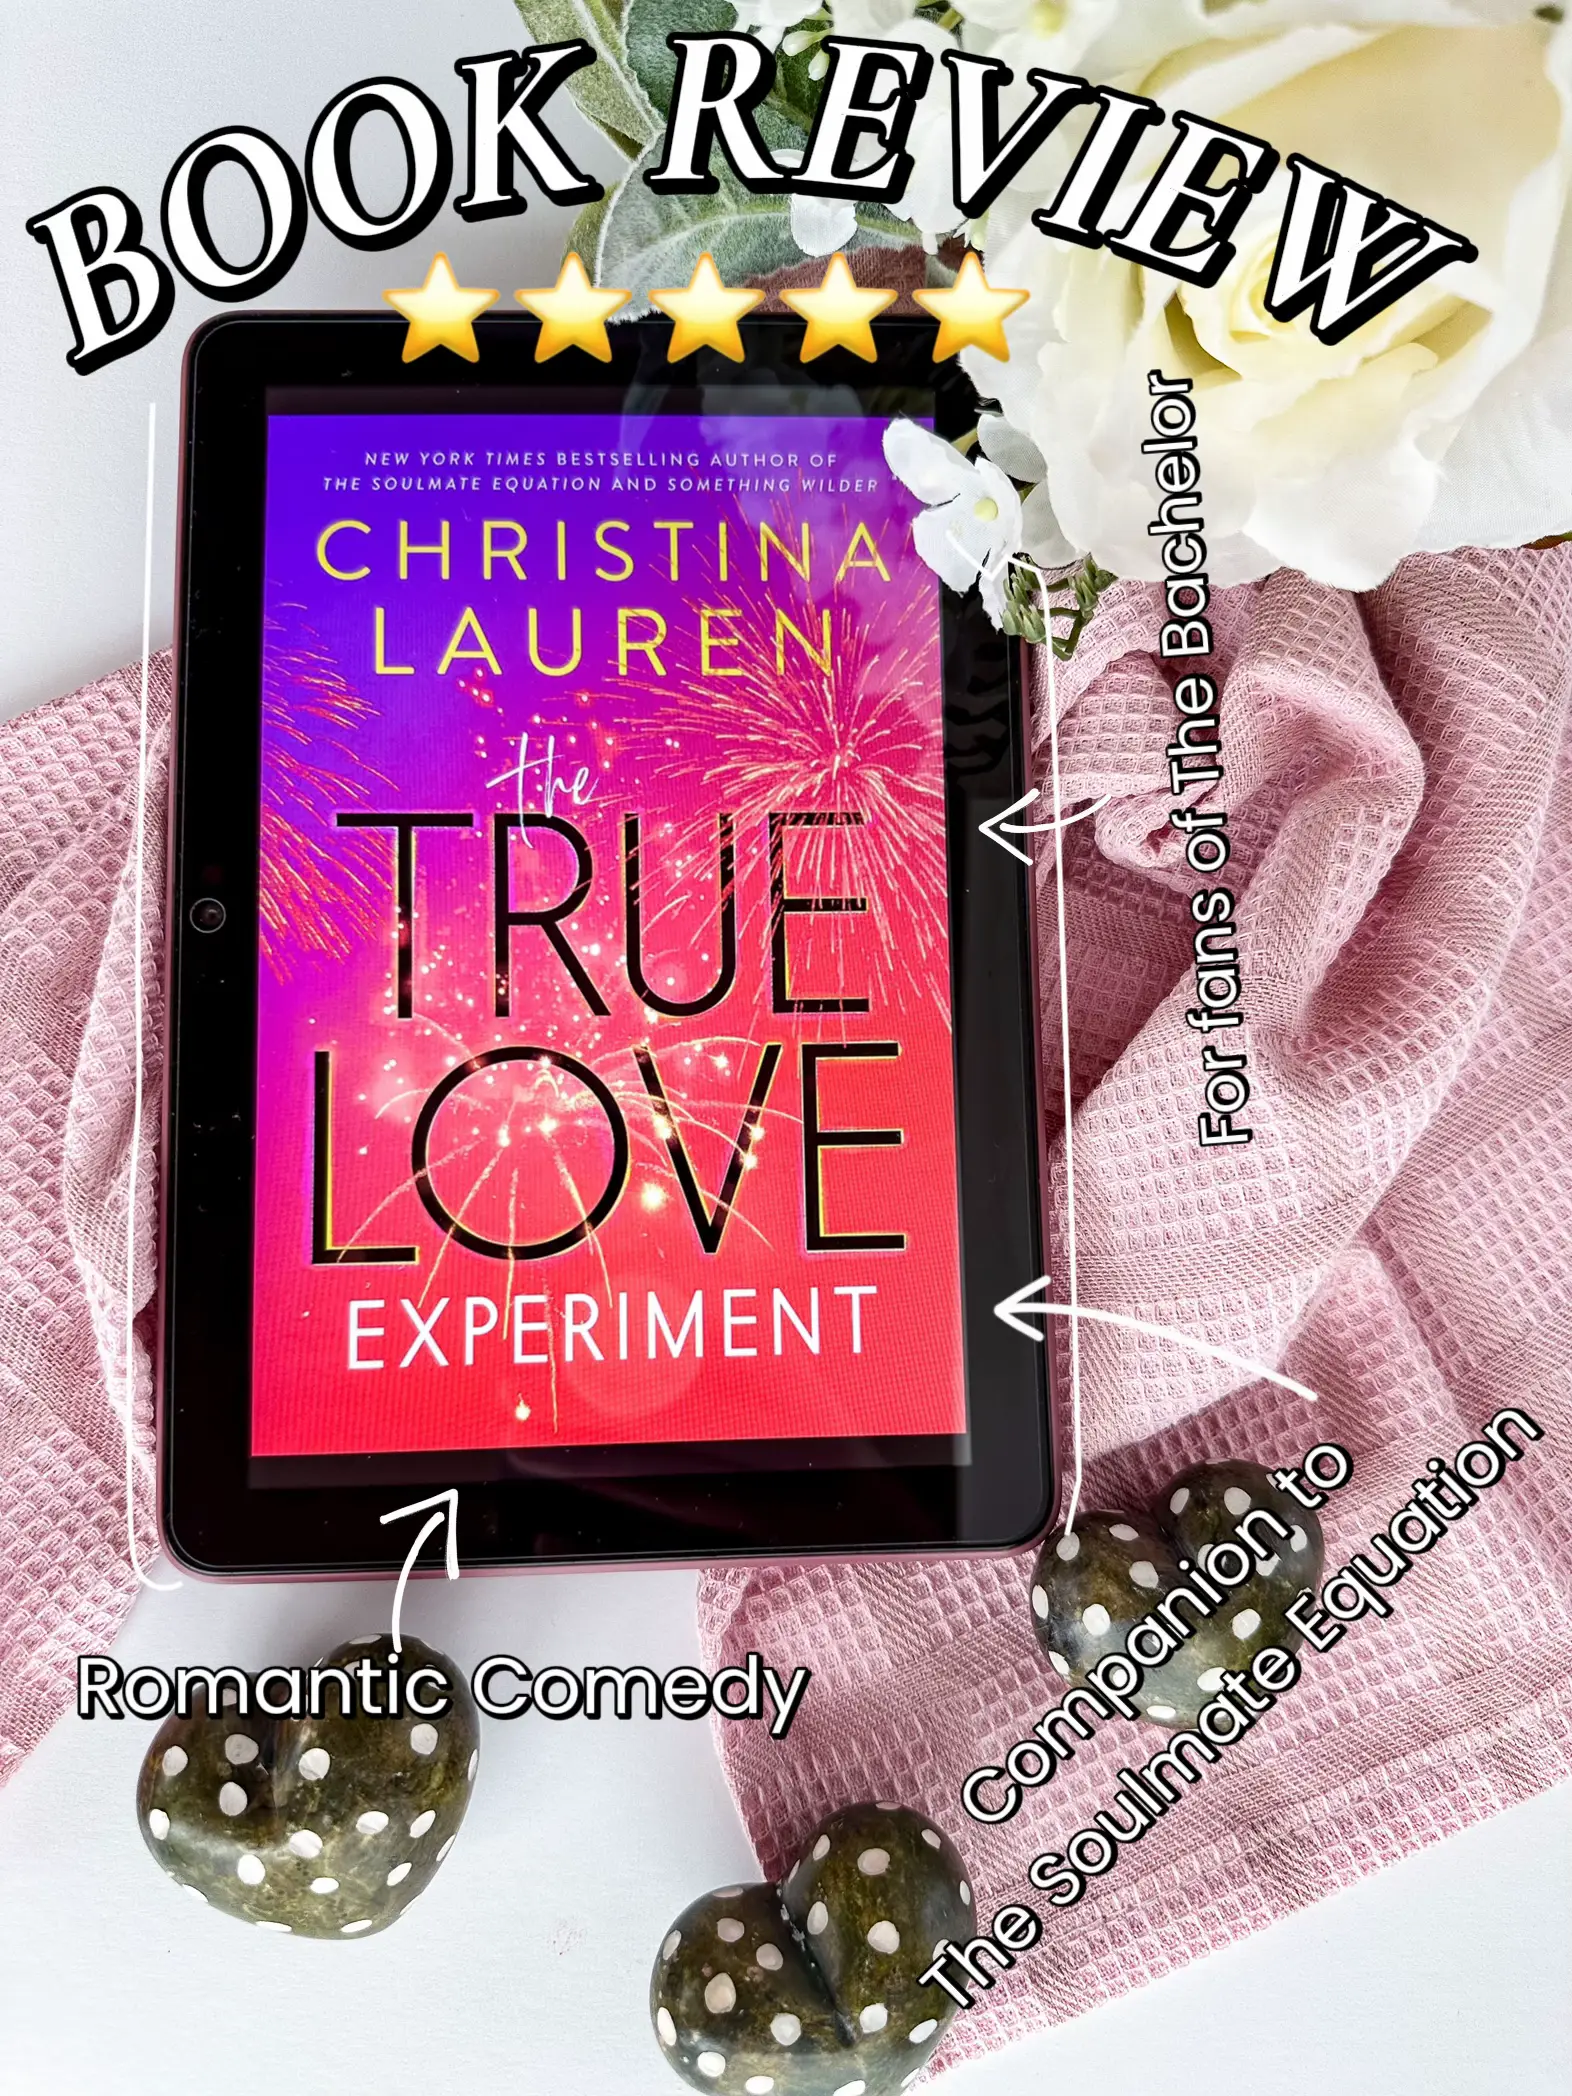 Review: Love is True